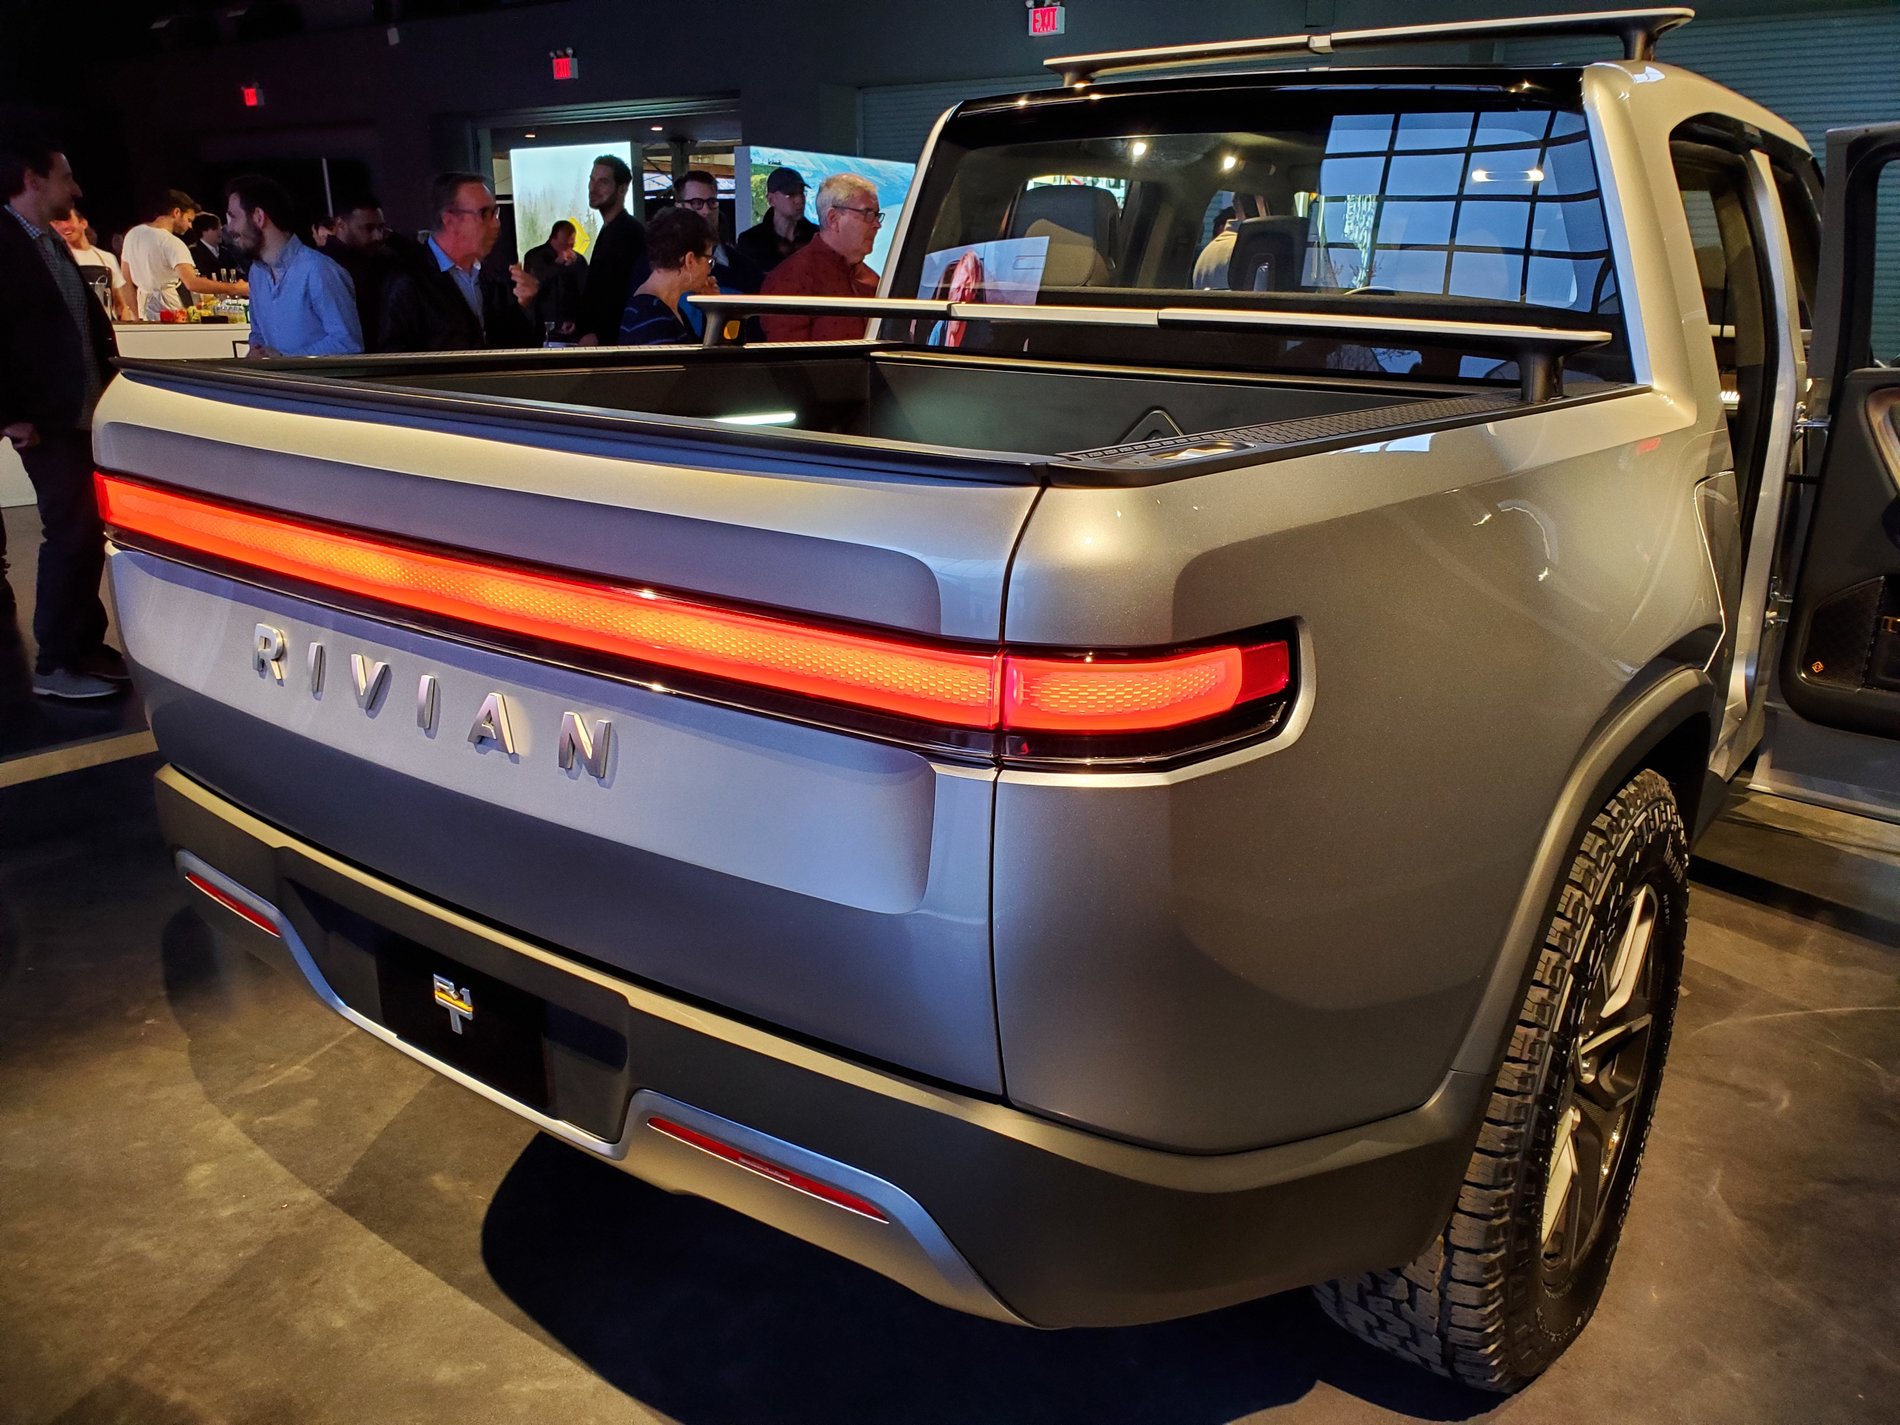 Rivian R1T R1S LIVE from Rivian's NY Auto Show Preview Event! (Q&A and R1T / R1S Hands-On) 20190412_185630